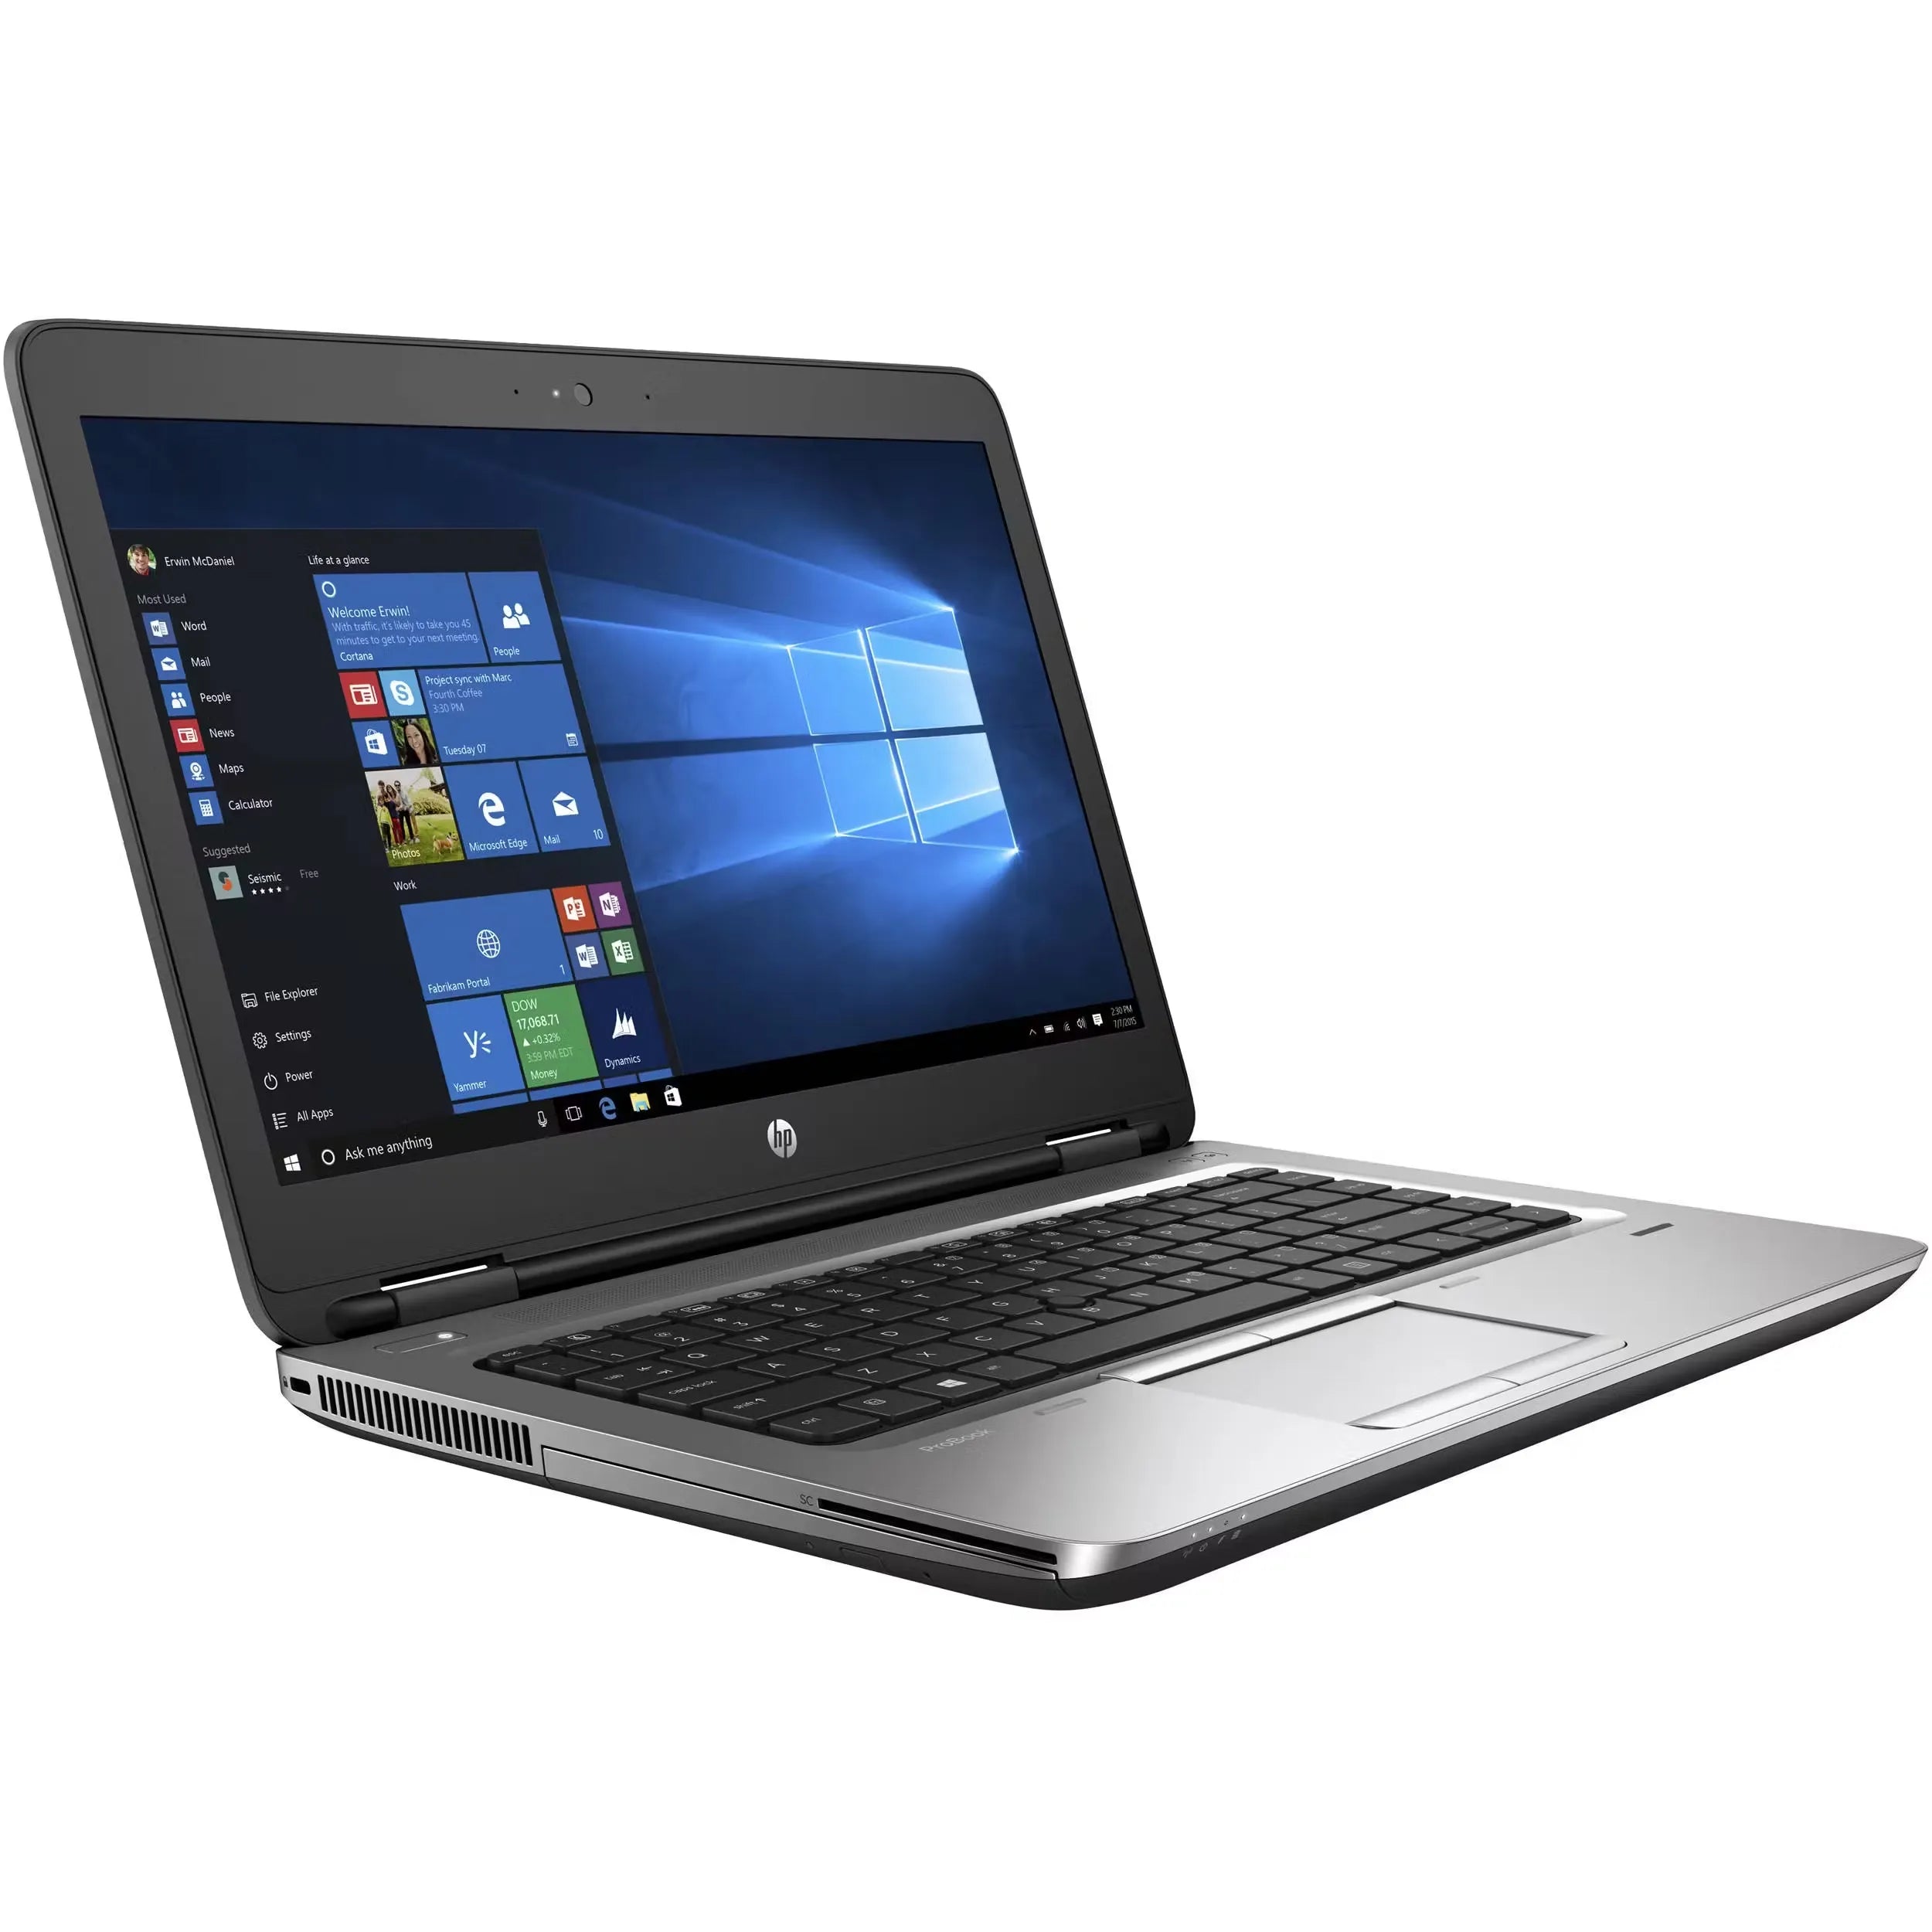 A silver HP ProBook 650 G3 laptop with a black keyboard and a 15.6 inch display. The laptop is closed and rests on a white surface.